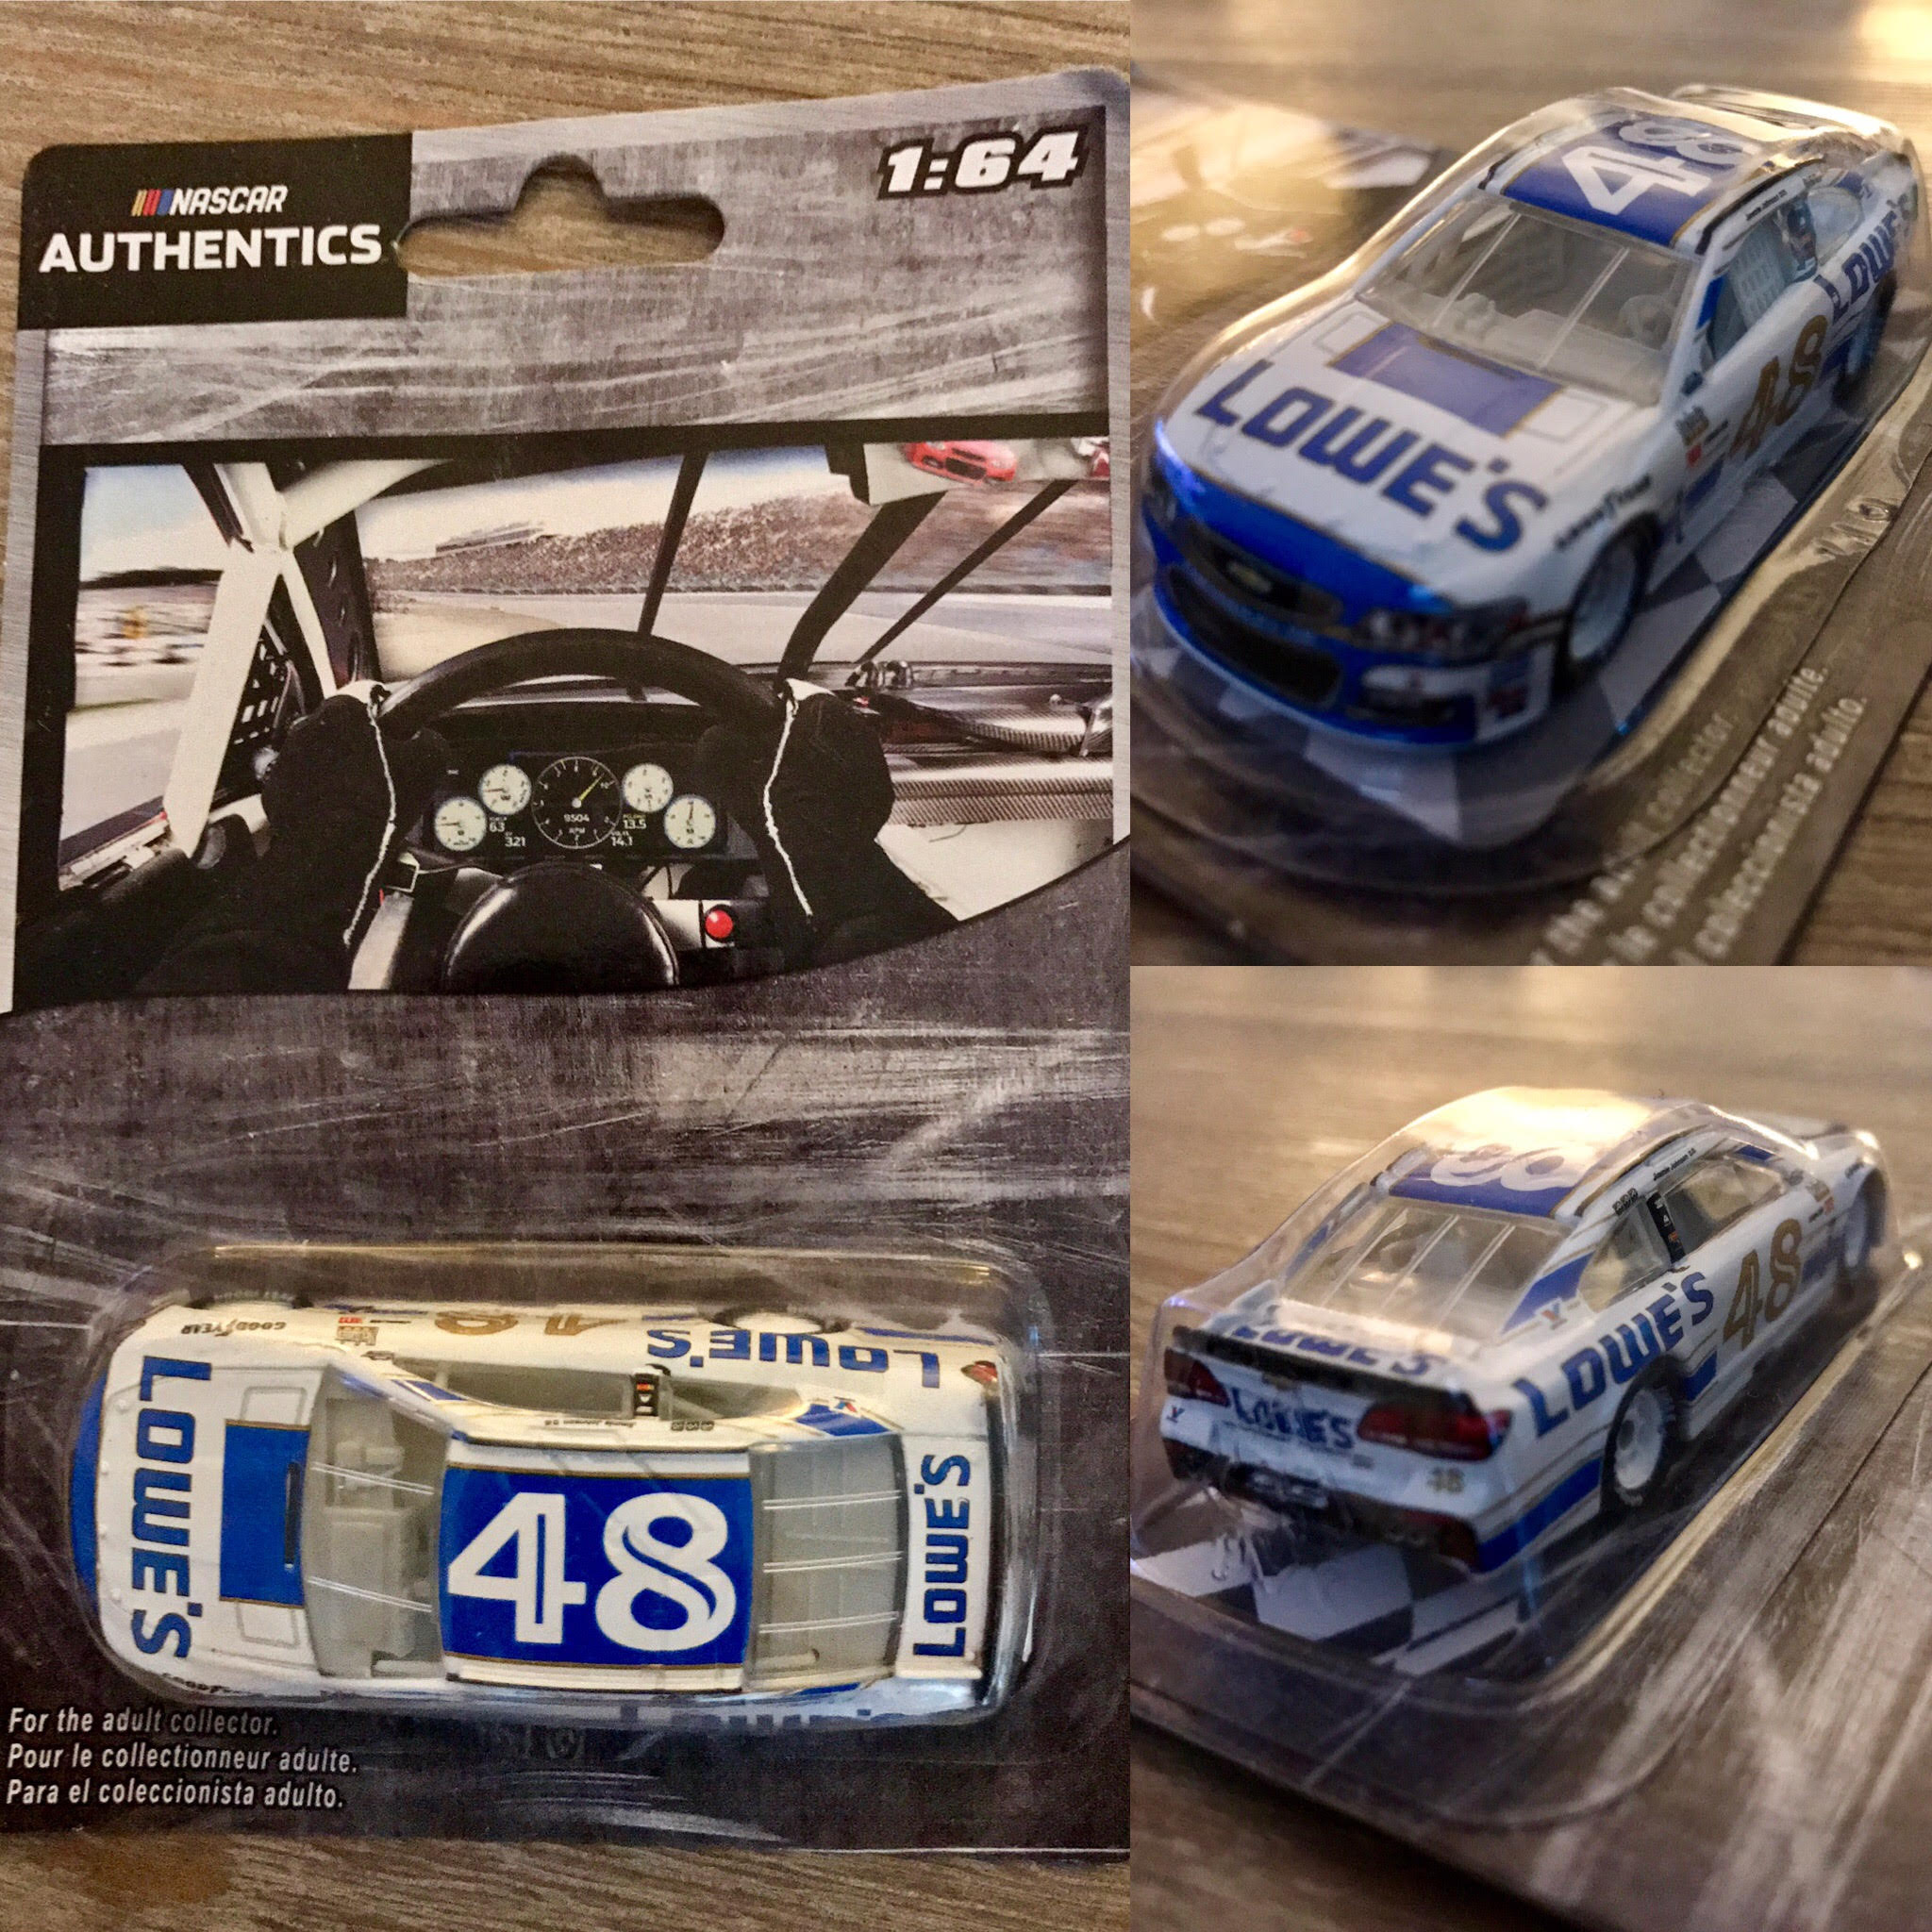 Fittingly, Jimmie Johnson's No. 48 throwback would pass for a car from 1986.